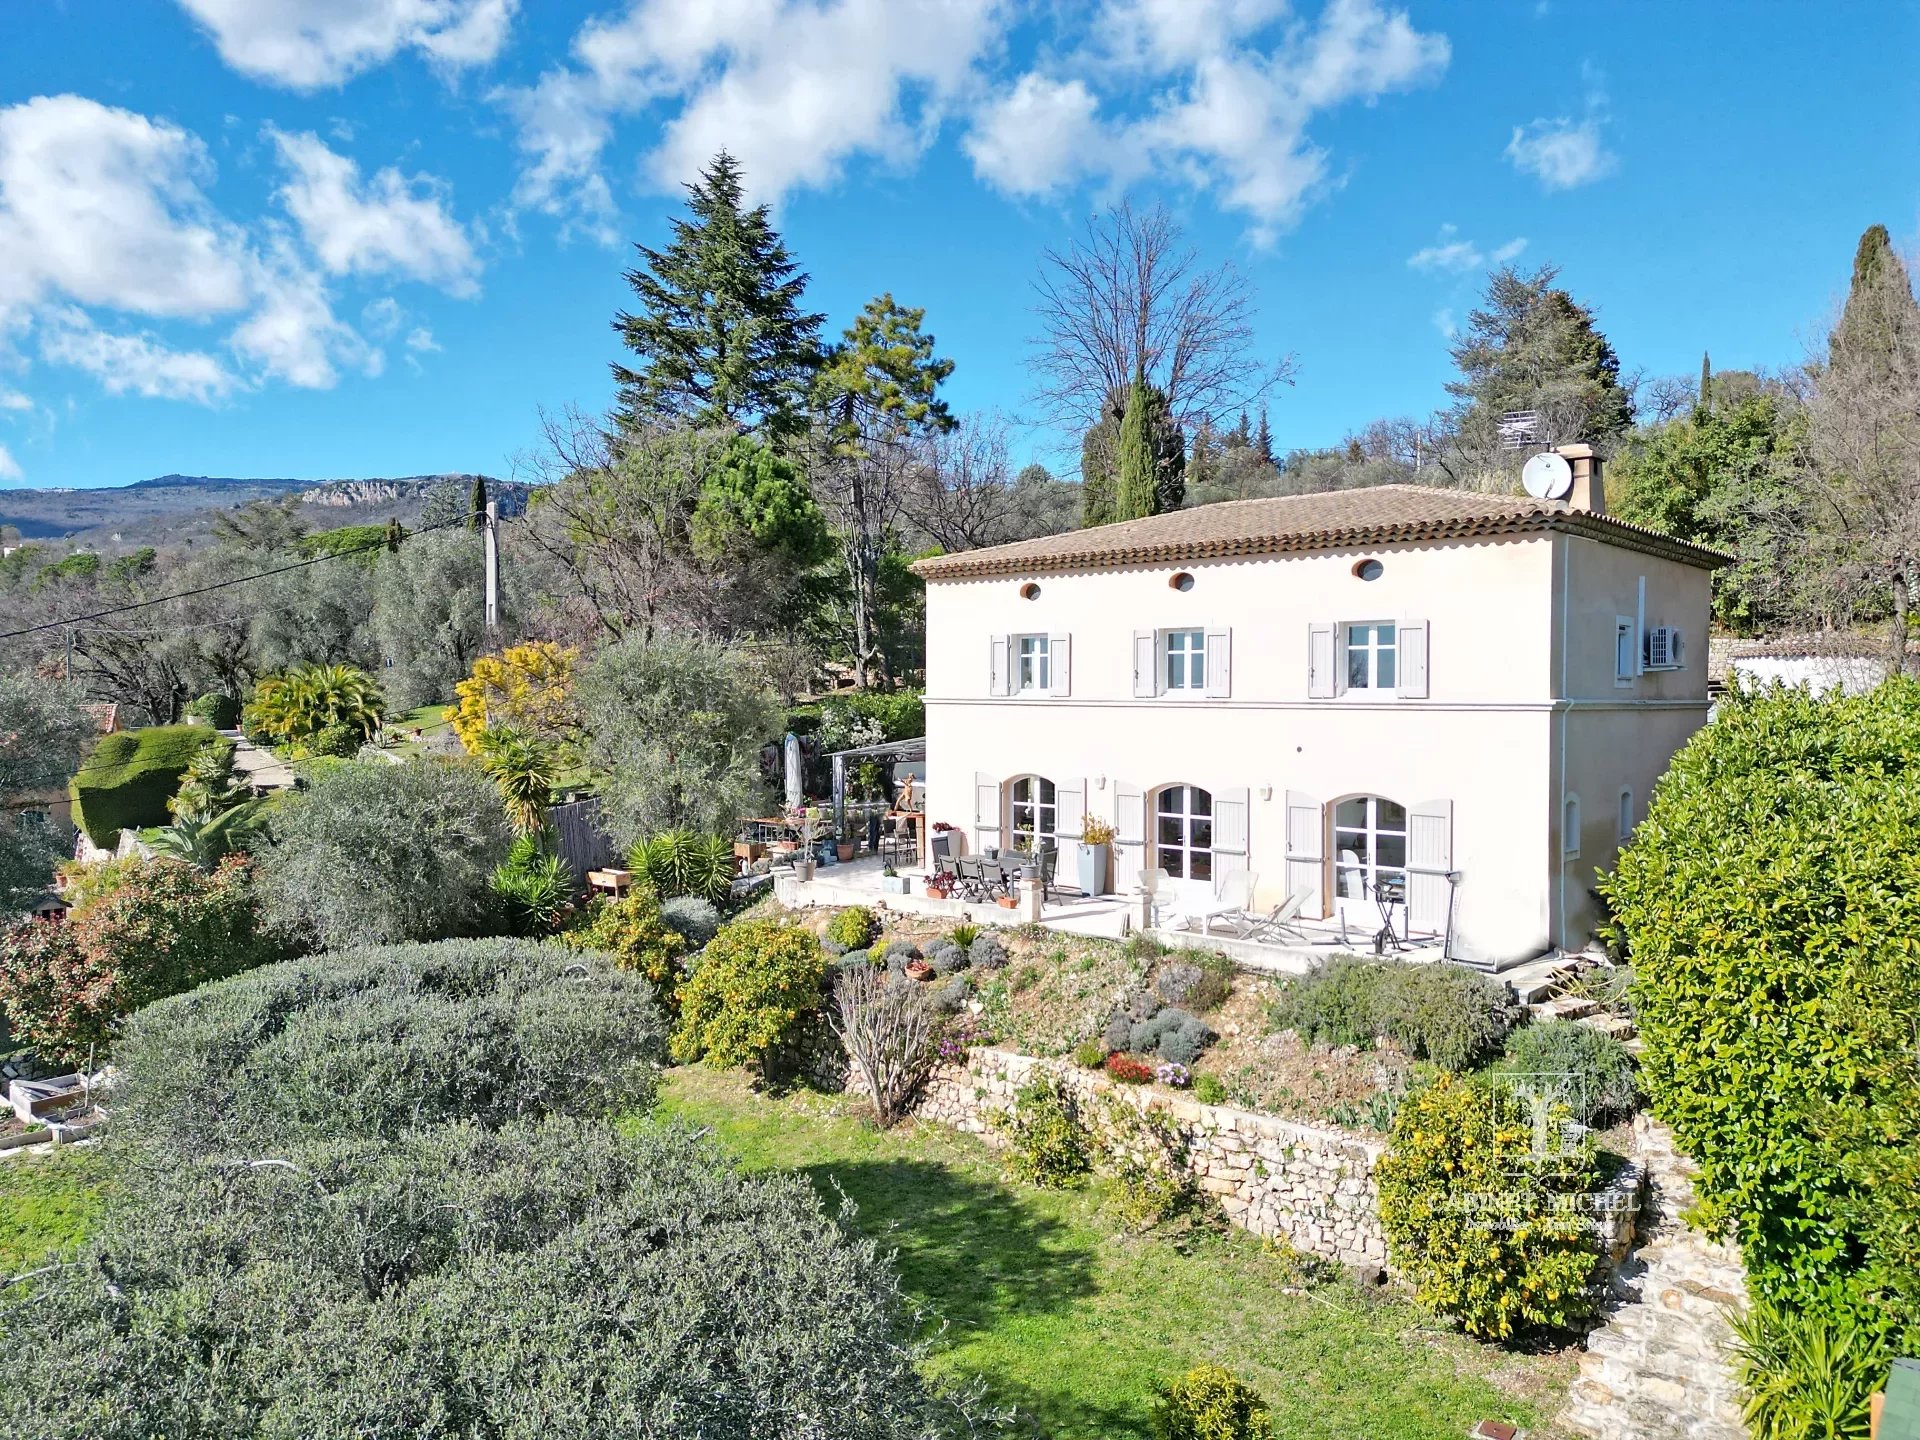 CHATEAUNEUF-GRASSE - Magnificent unobstructed view of the sea and hills